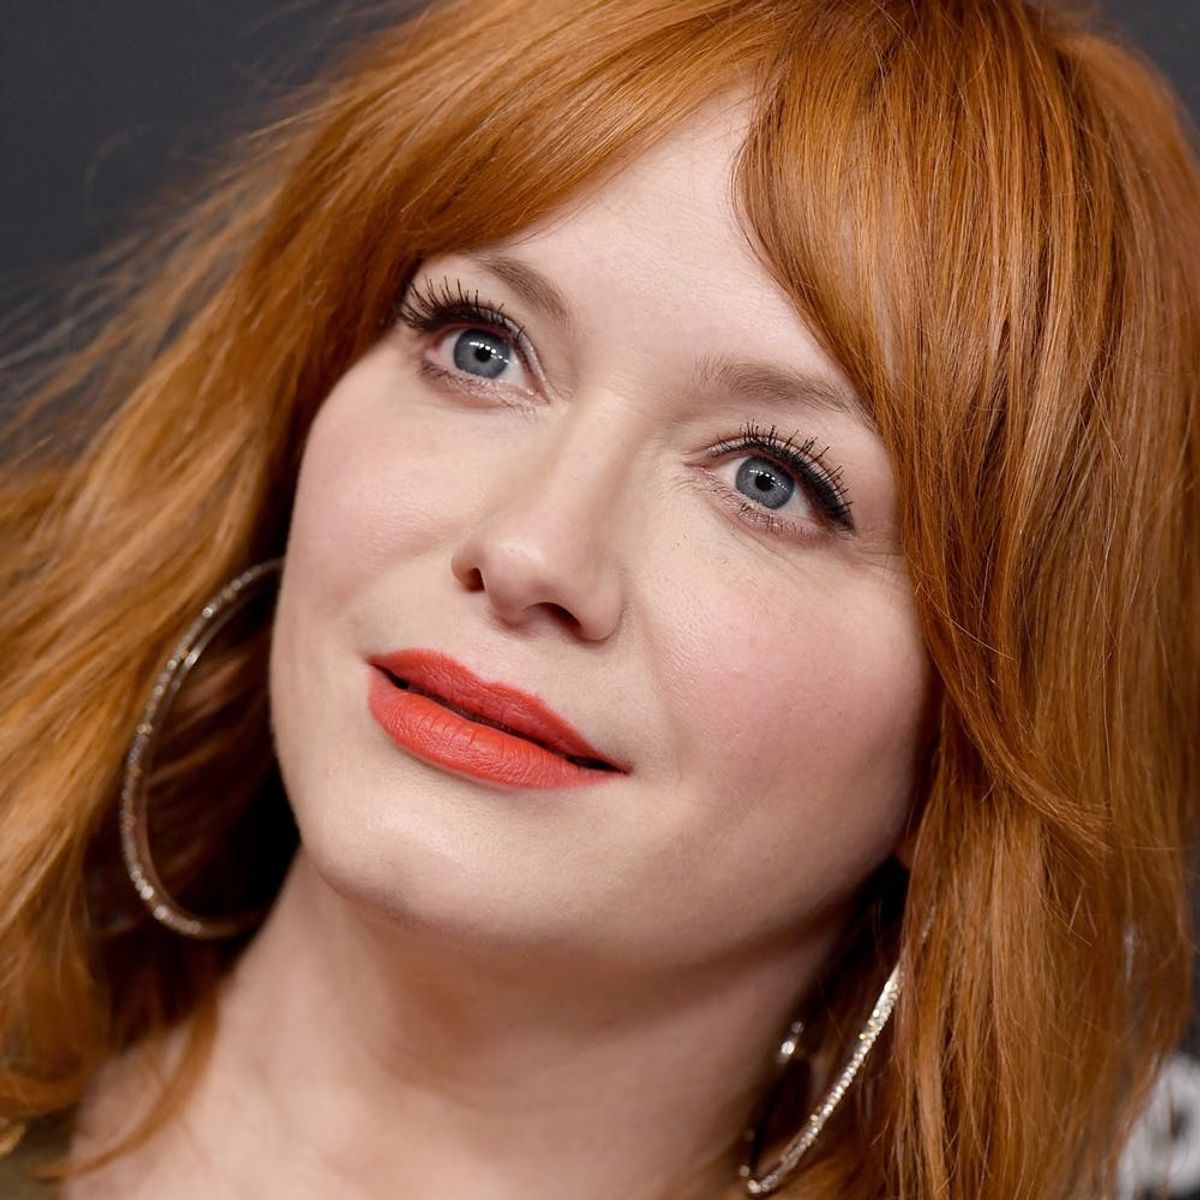 Orange-Red Hair Is the Fiery Hue Celebs (and We) Can’t Get Enough Of